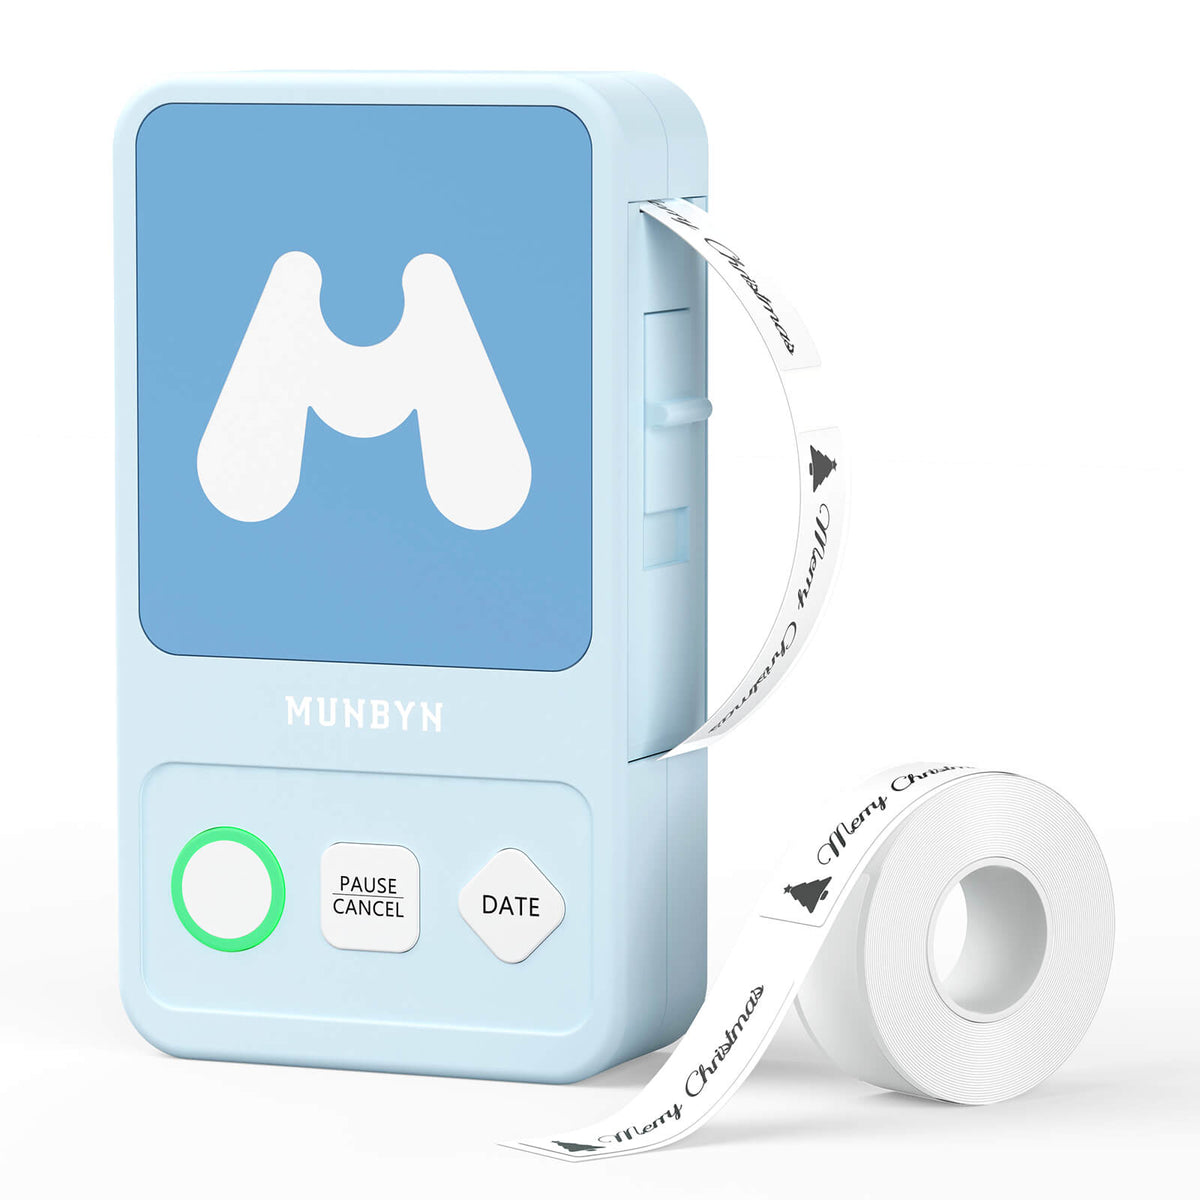 MUNBYN FM520 label maker is a compact and portable device that you can take with you wherever you go.